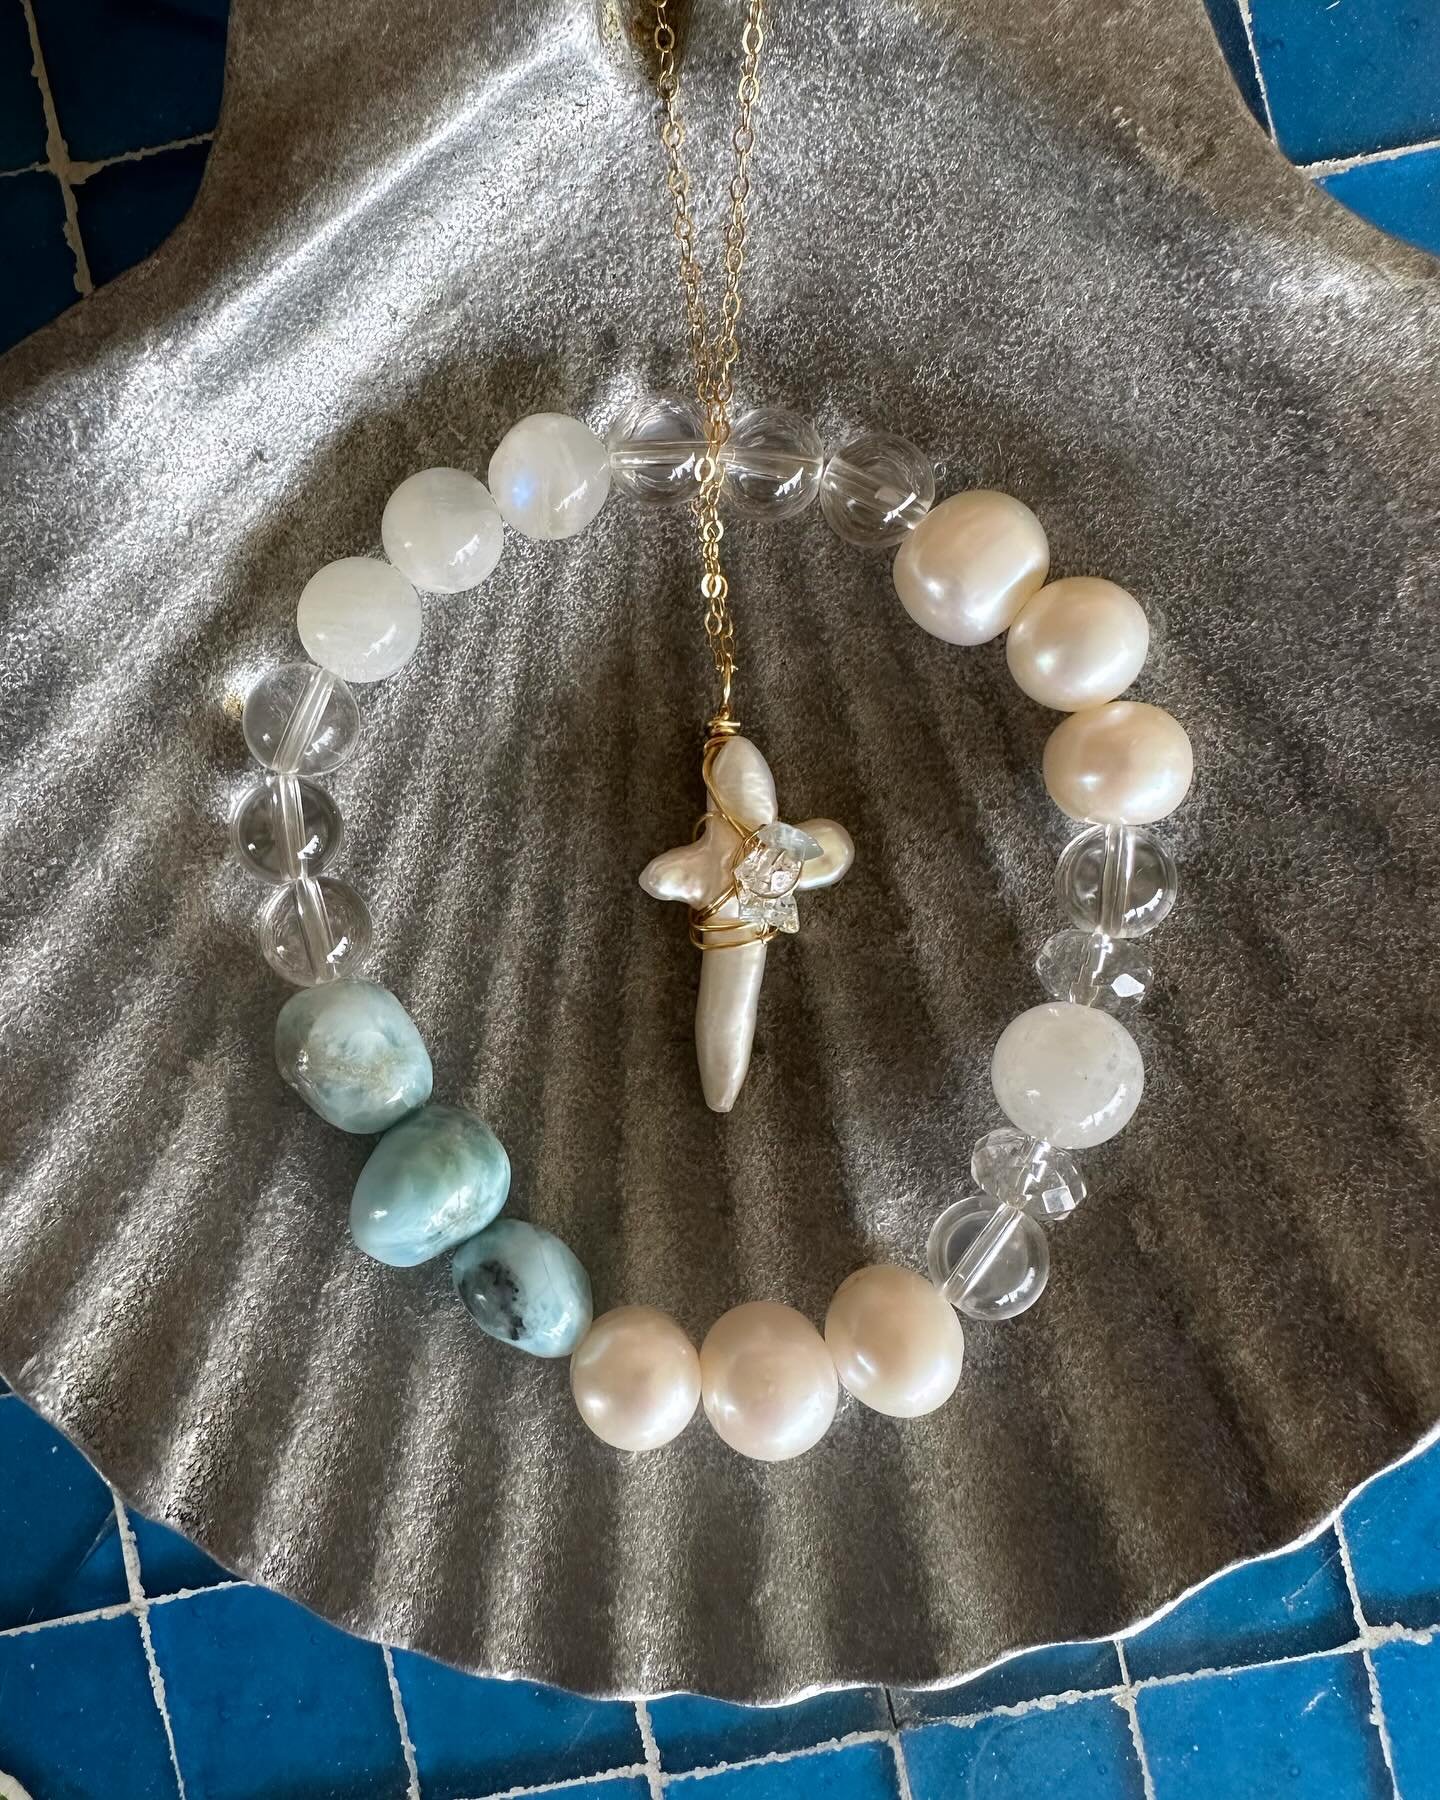 Inspired 🌟with these beautiful Pearls. ~Healing jewelry~

PearlーMothering energy, easing pain, Soothing and Peaceful

Larimer&mdash;Buildong confidence and serenity, reduces depression, self-love, healing your inner child

🎄💕🎄💕
We will be at #pn